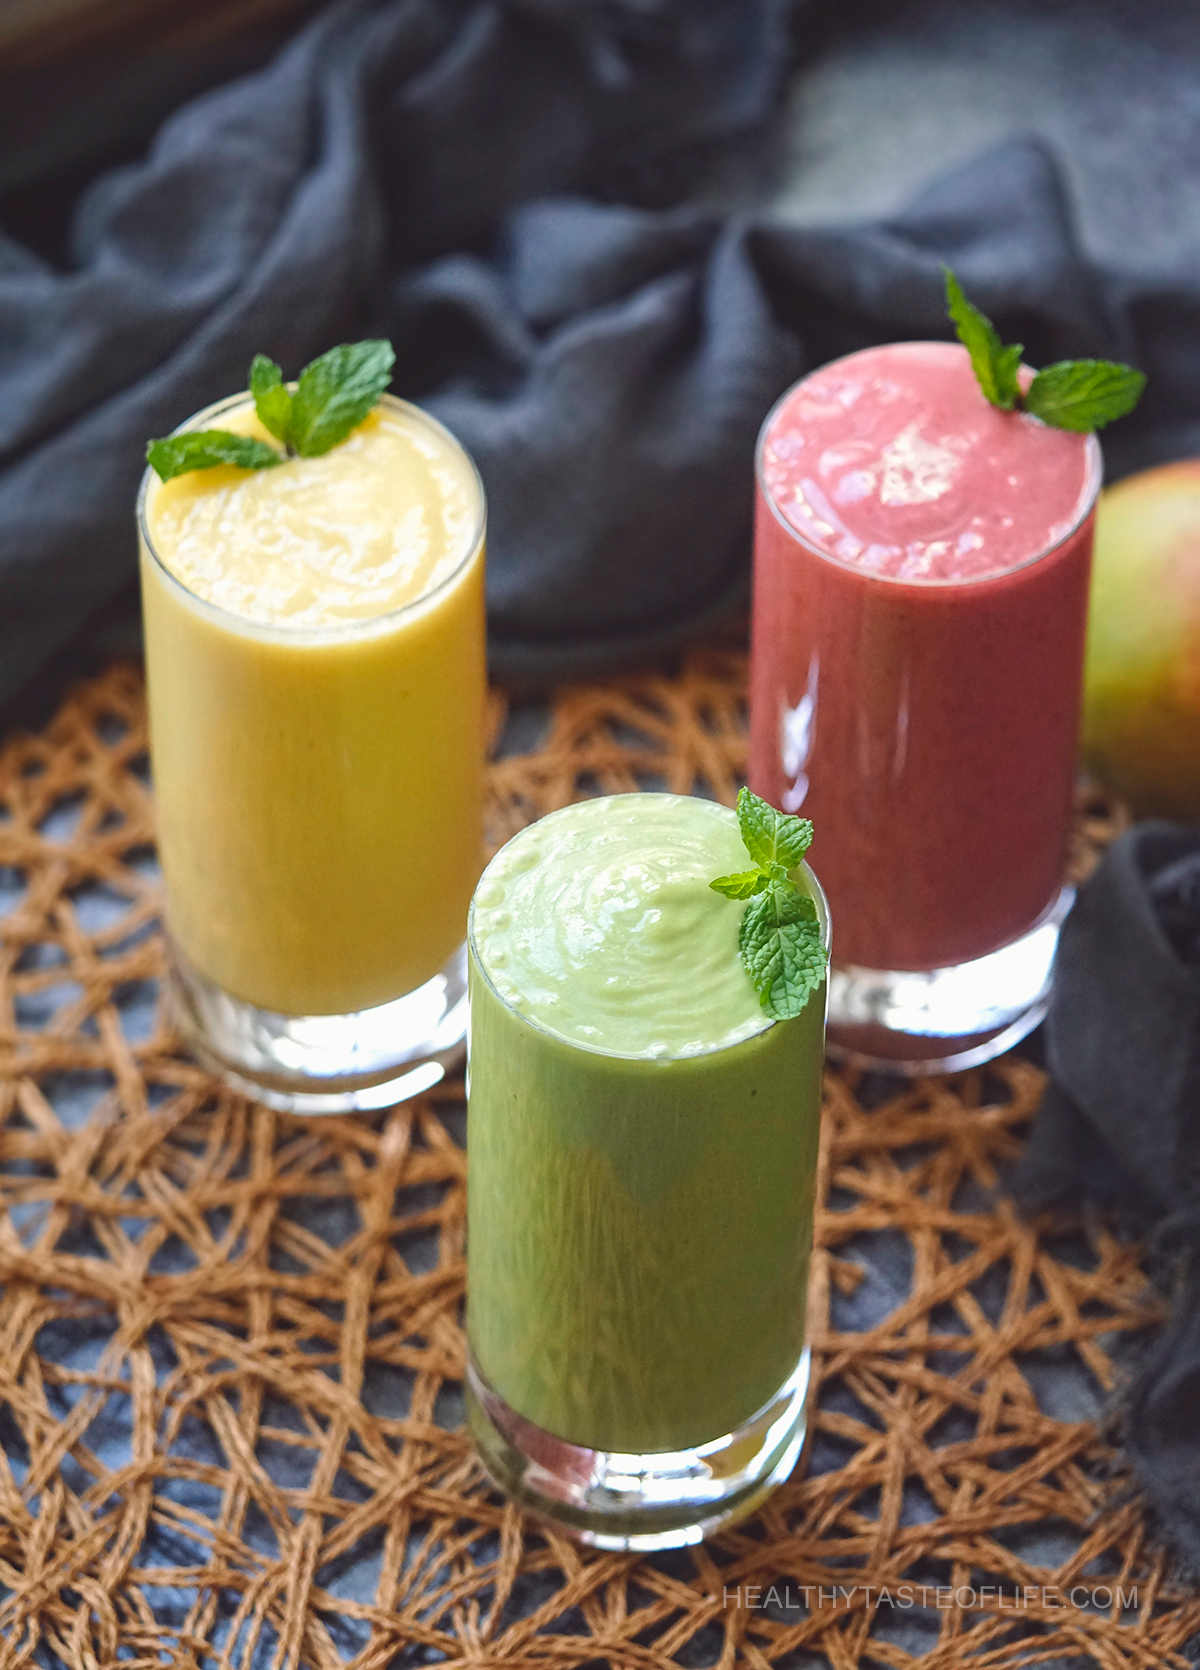 3 Versions of making smoothies with mango and pineapple.